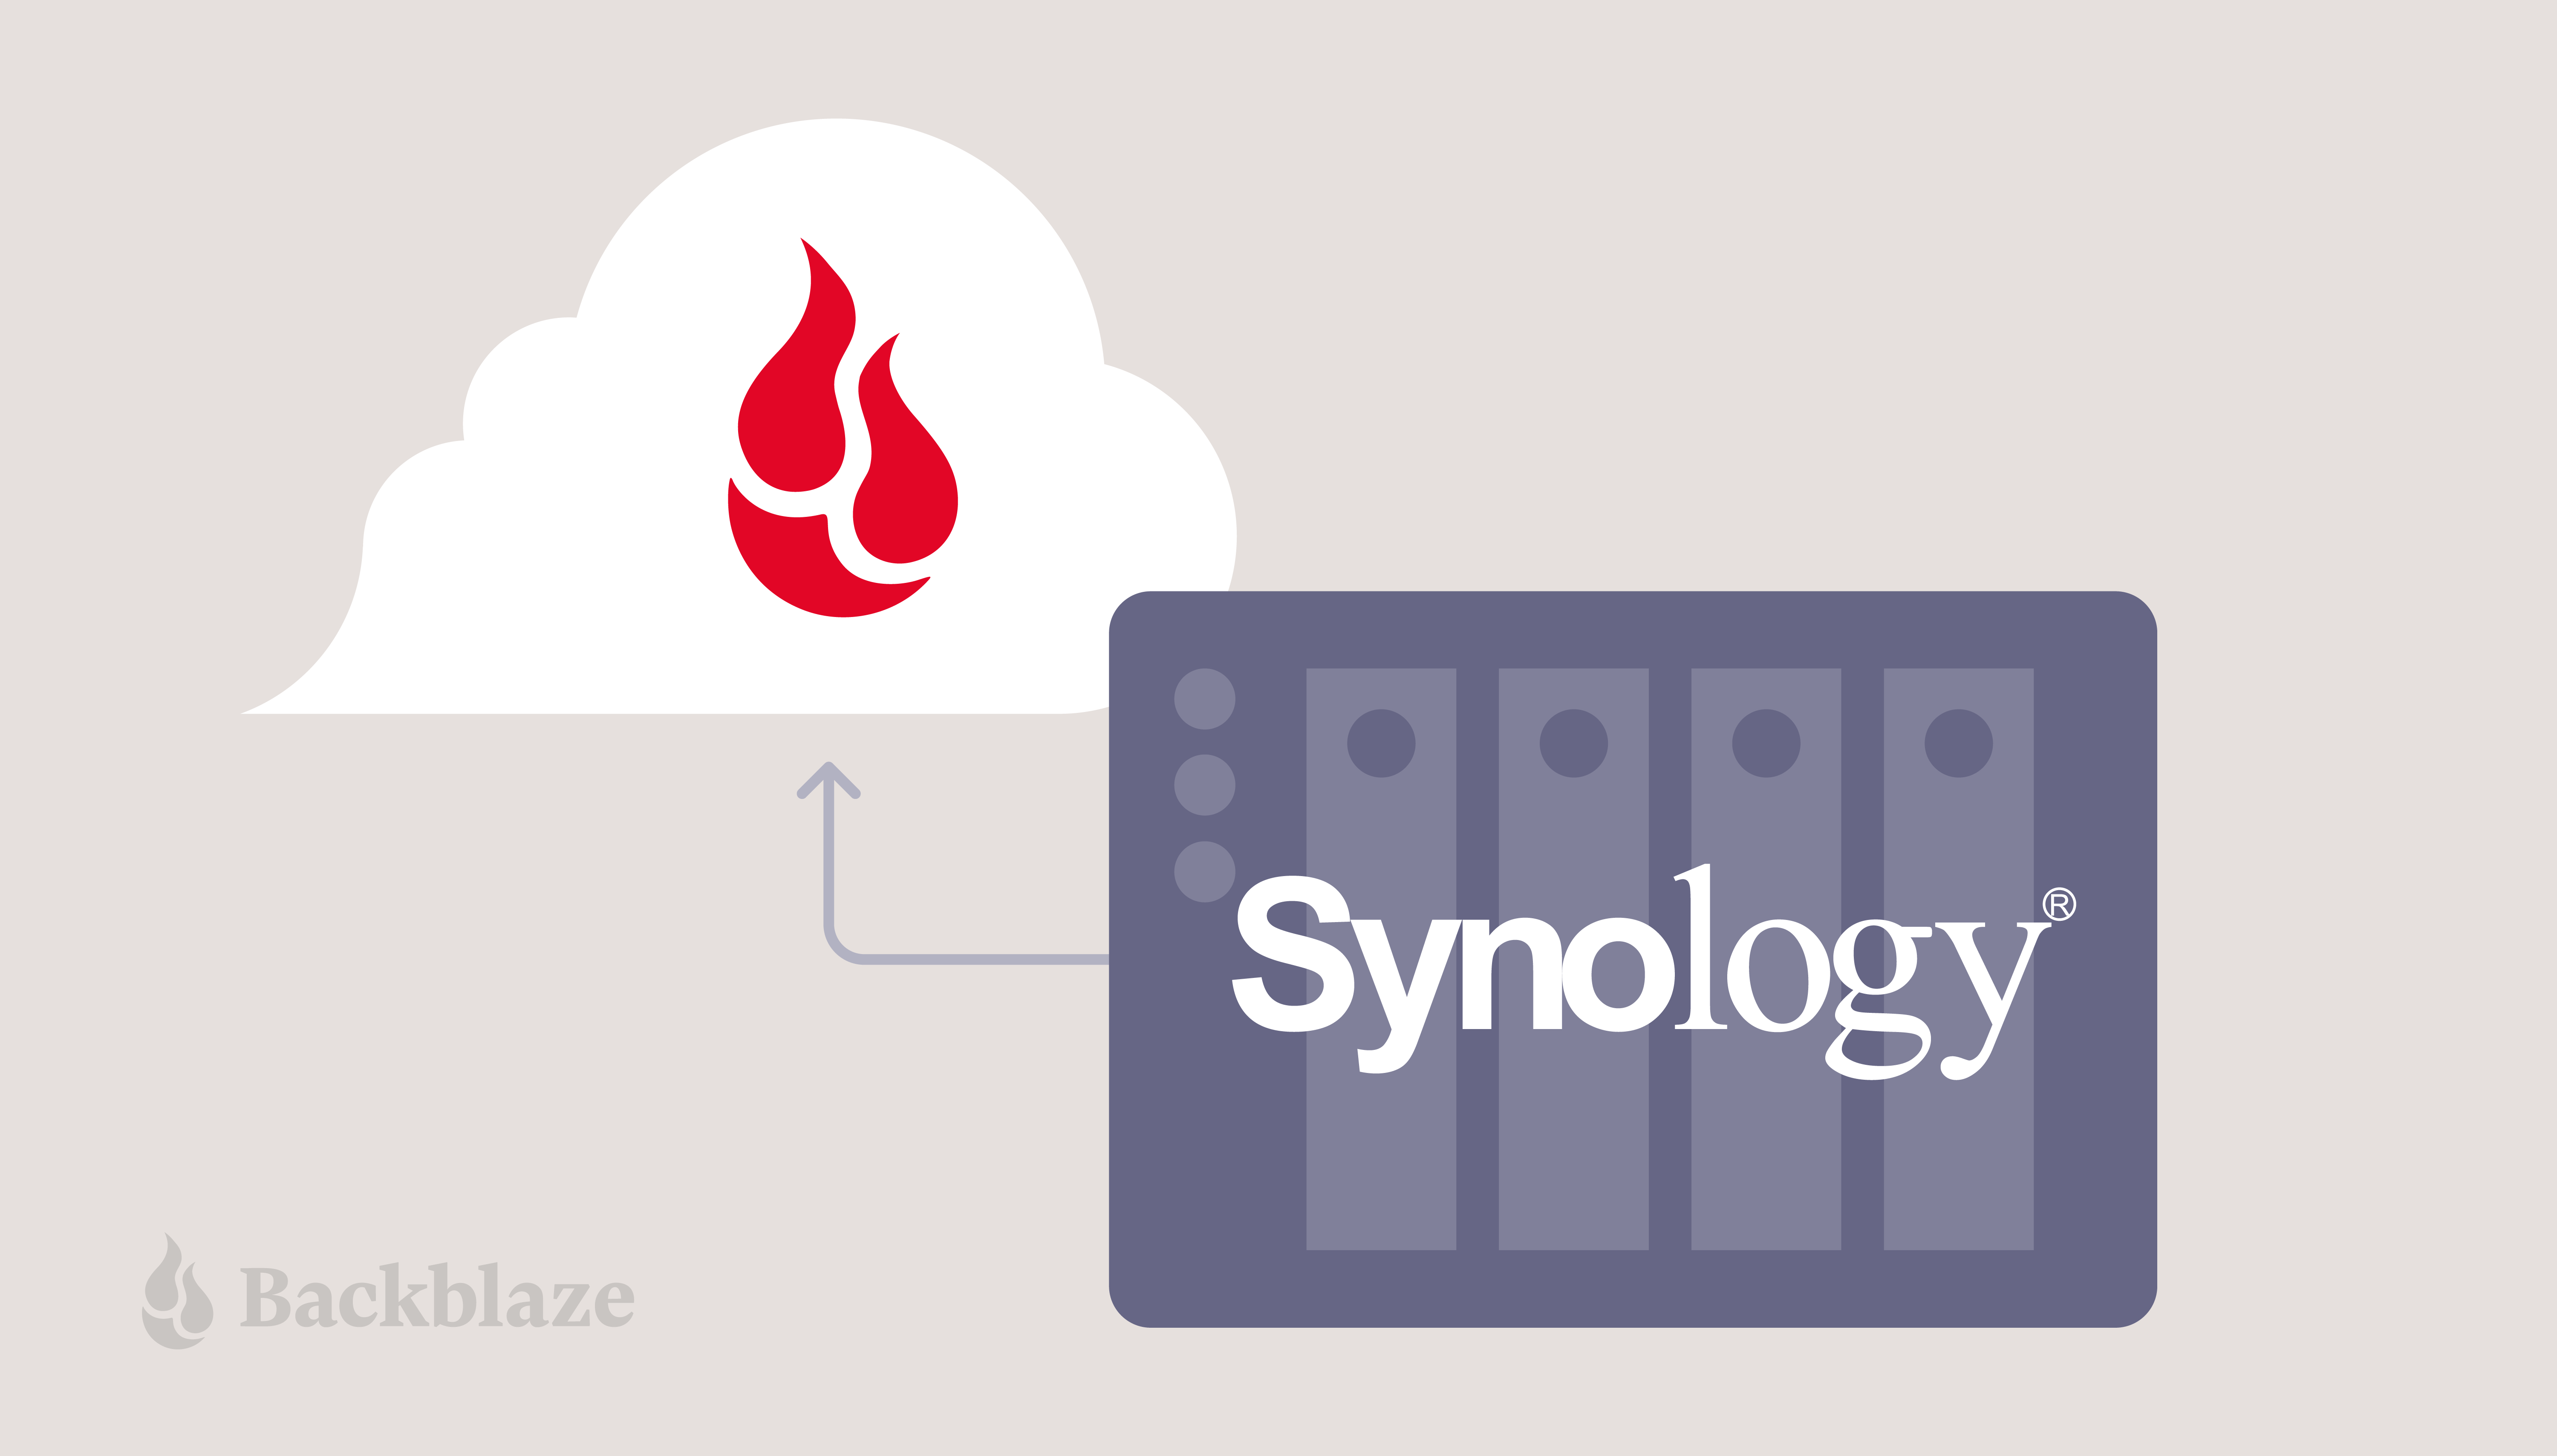 https://www.backblaze.com/blog/wp-content/uploads/2021/10/bb-bh-How-to-Connect-Your-Synology-NAS-to-Backblaze-B2-Cloud-Storage_Design-A-1.png